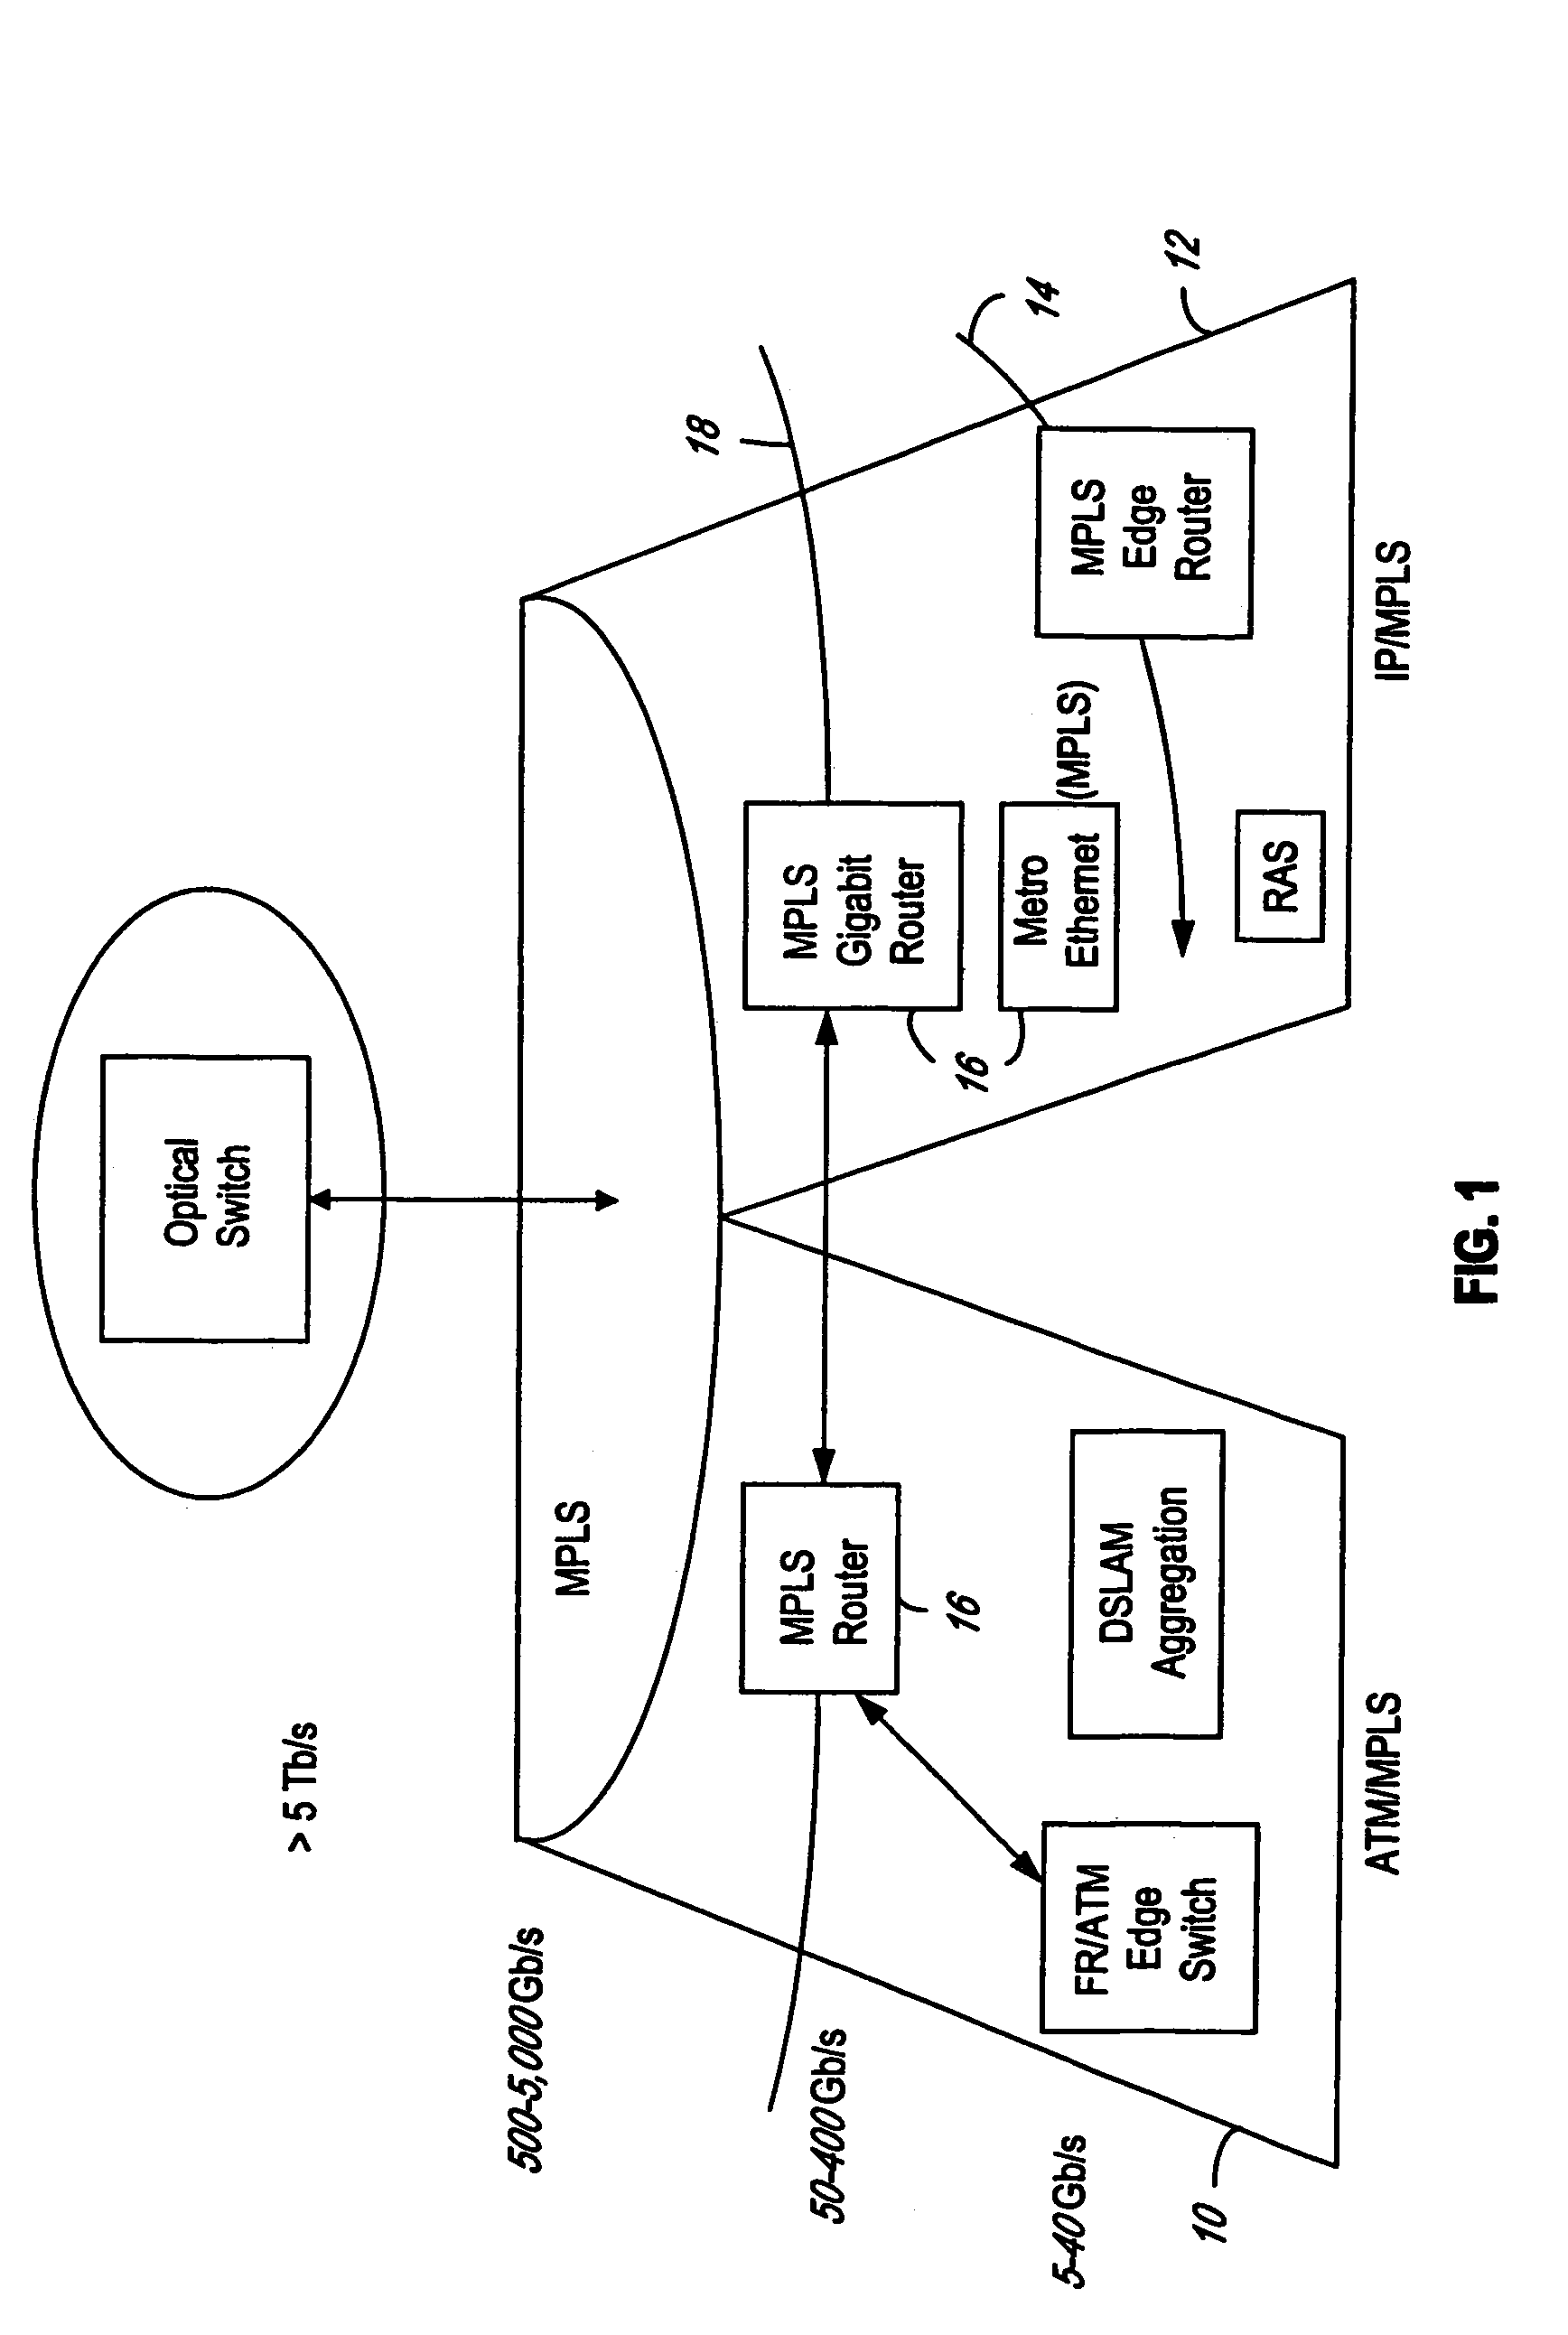 System and method of downloading configuration data from a central location to components for a communication switch